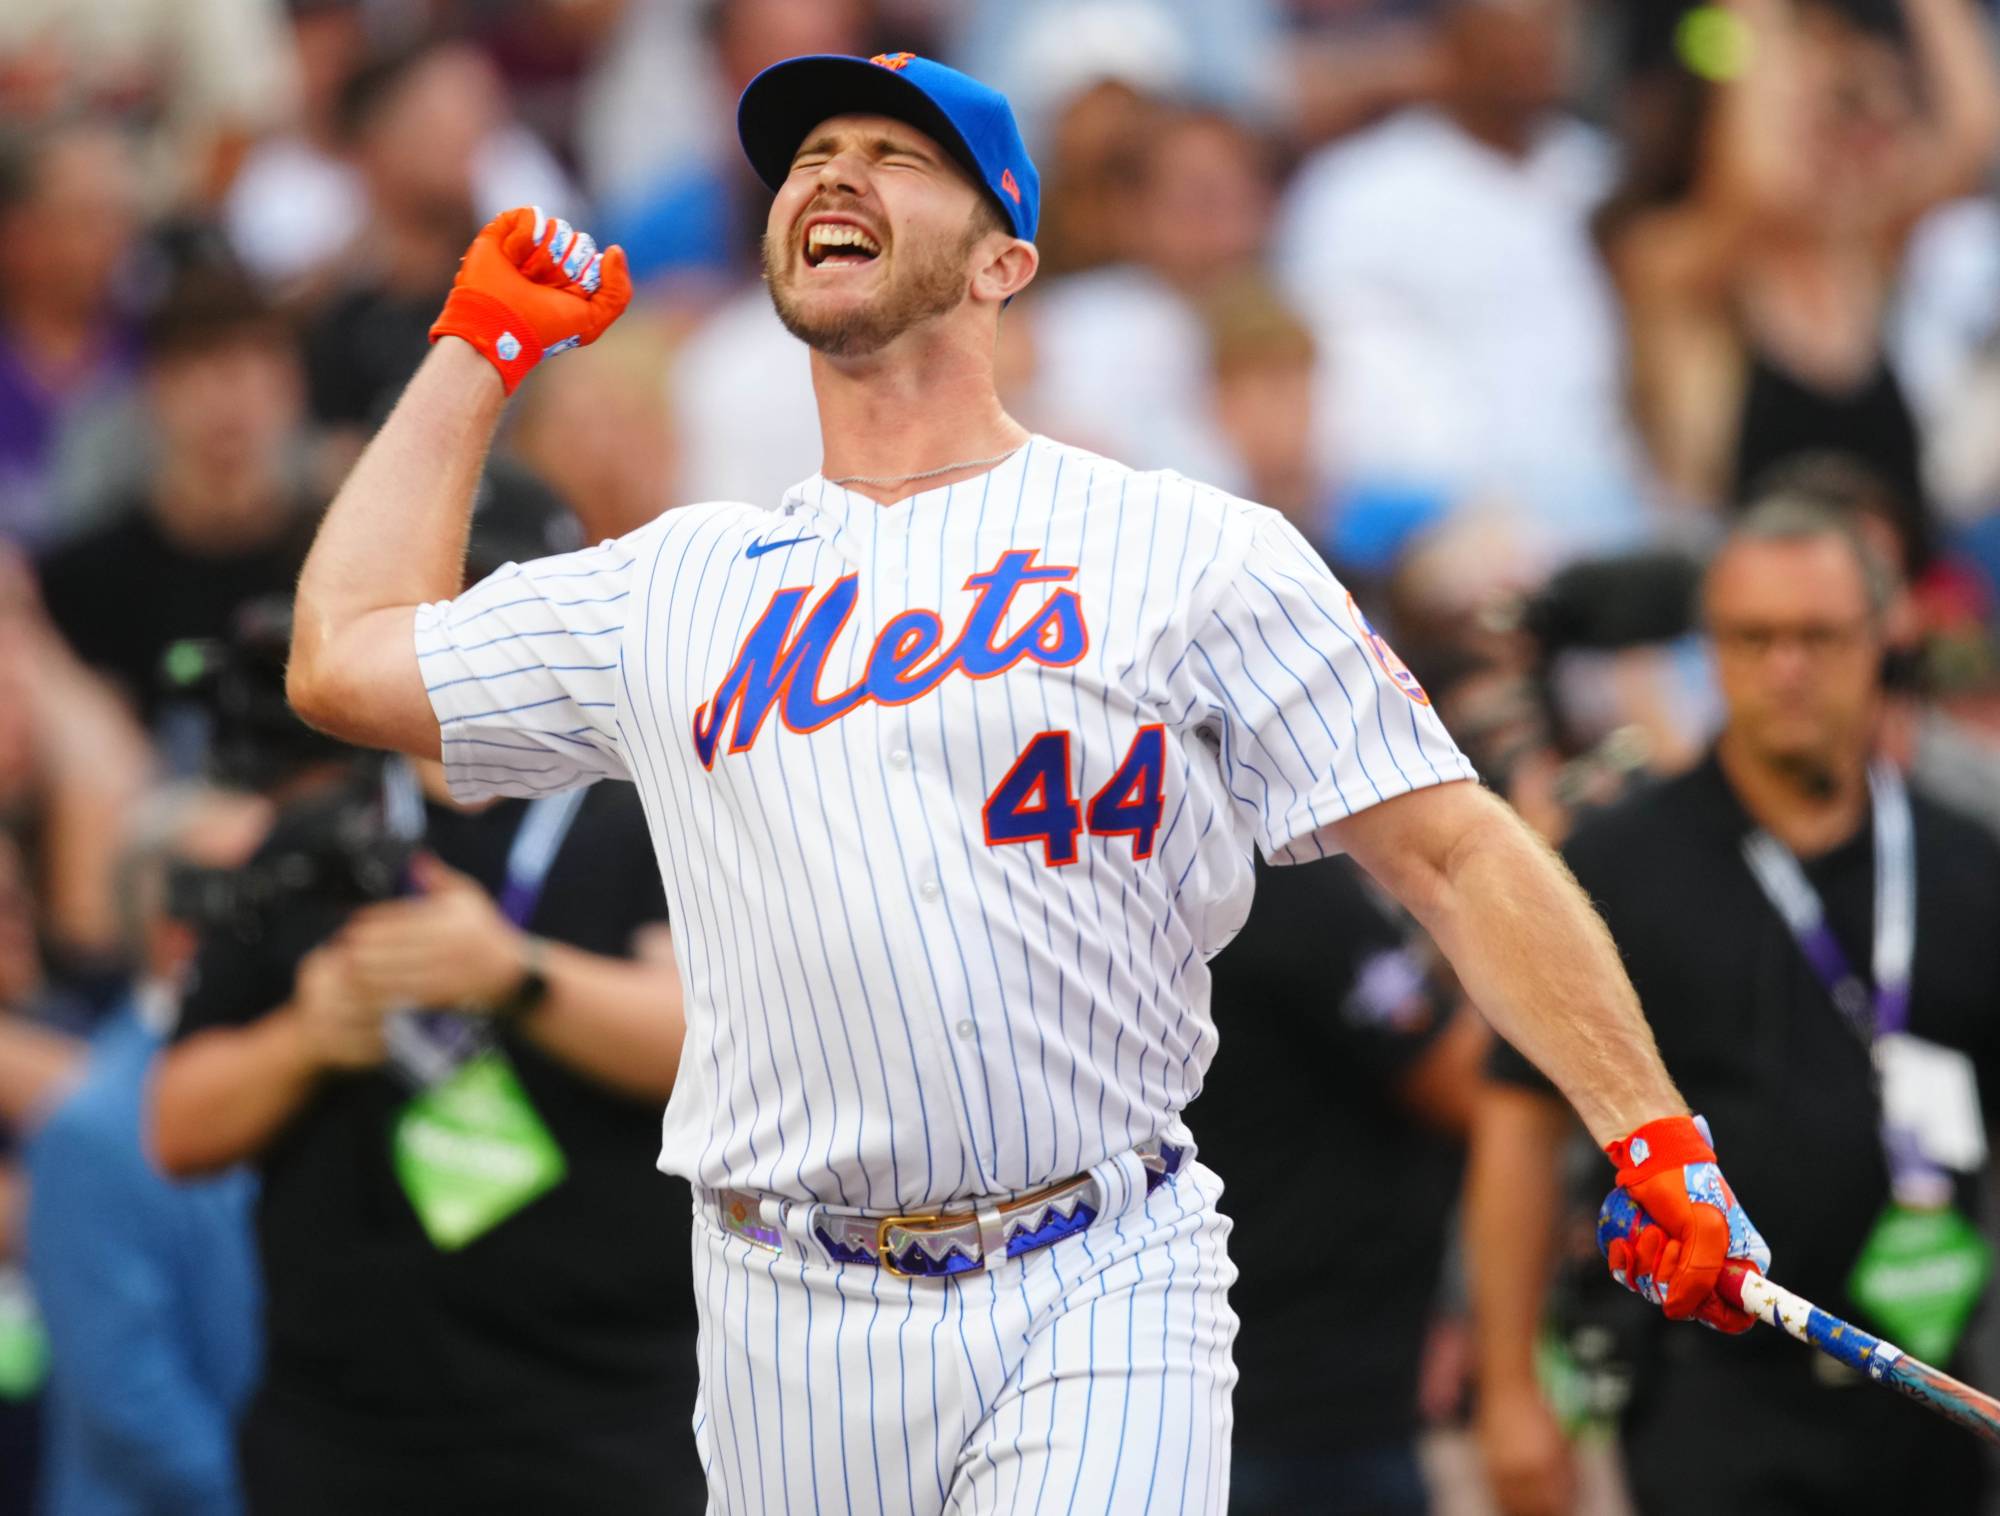 pete alonso home run derby pitcher